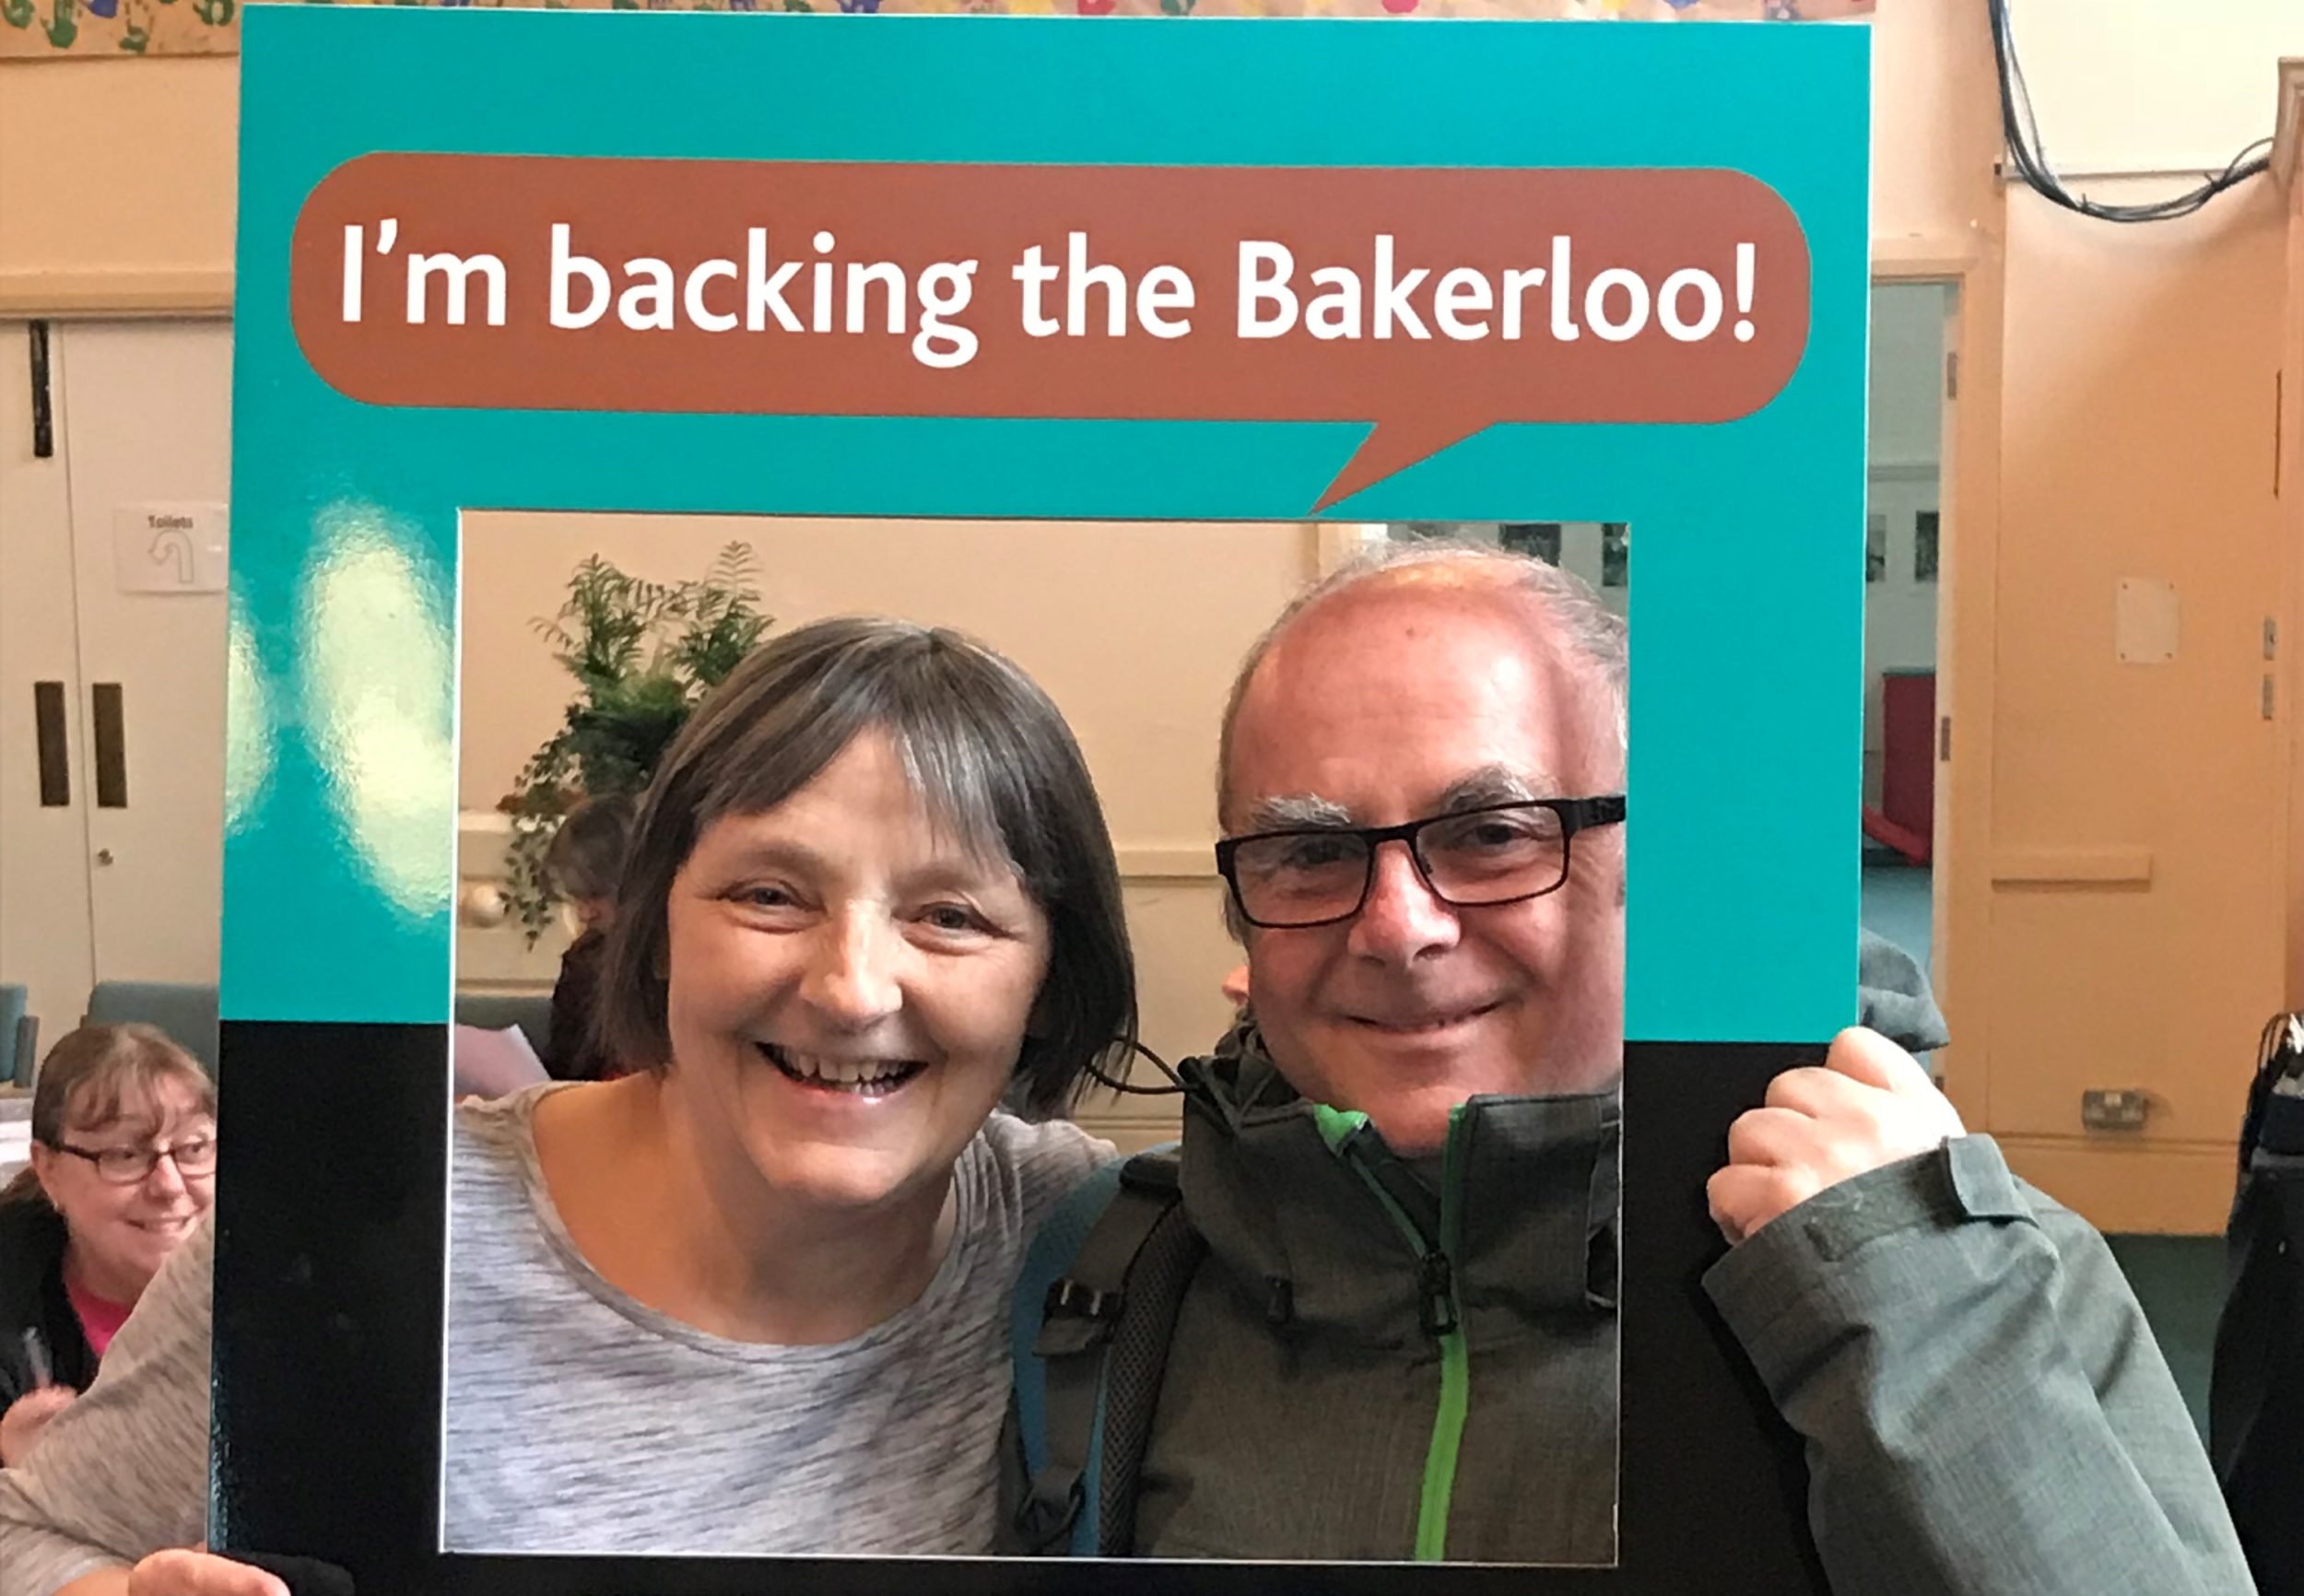 Join the 10,000 people who have already Backed the Bakerloo